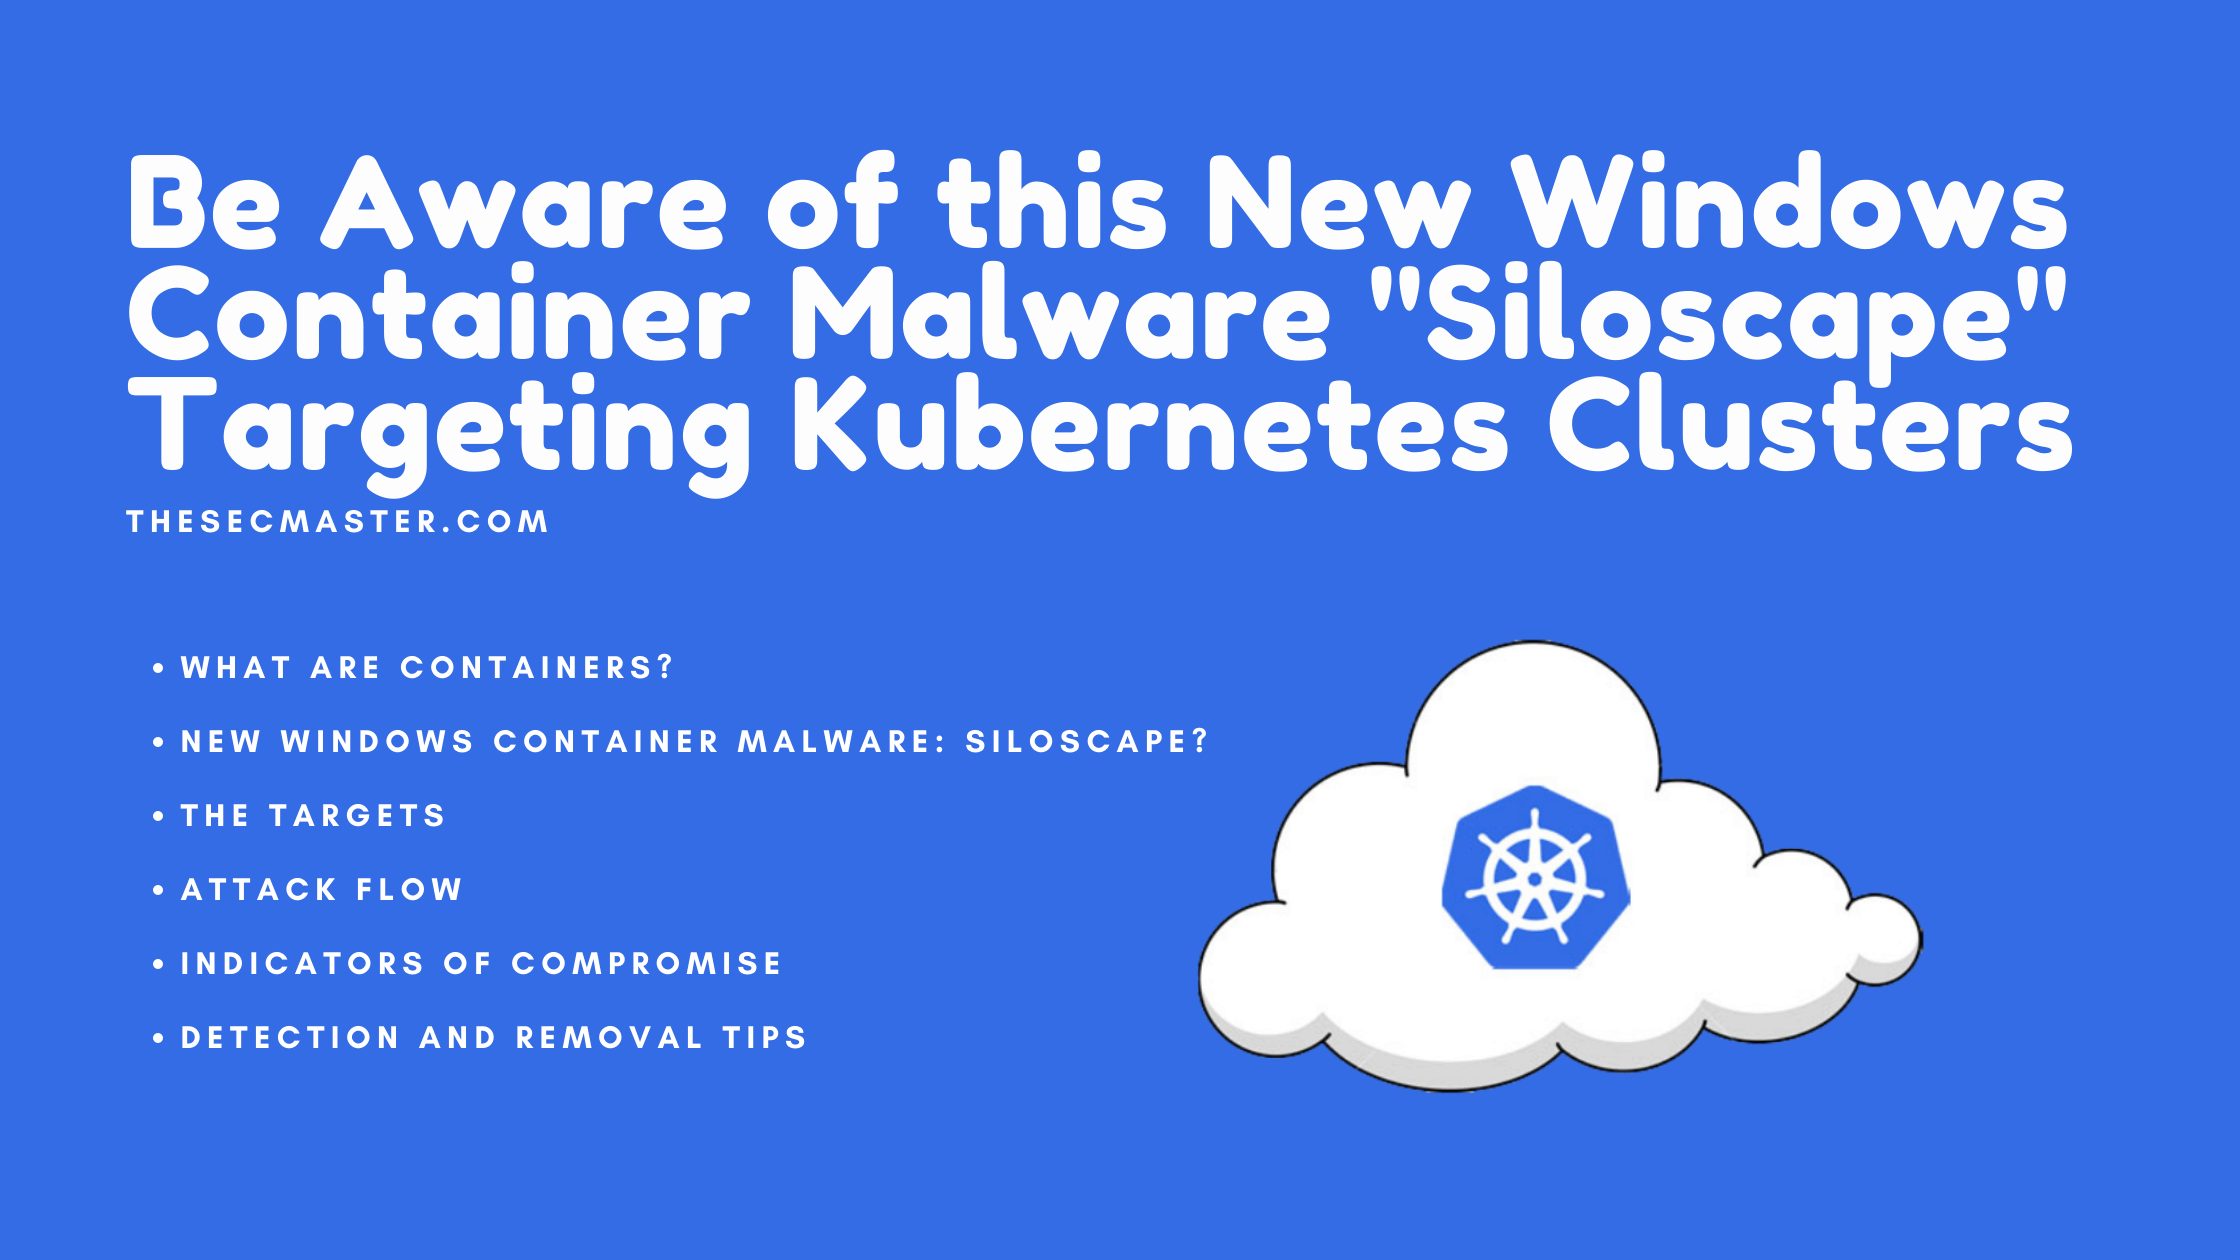 Windows Container Malware Siloscape Targeting Kubernetes Clusters